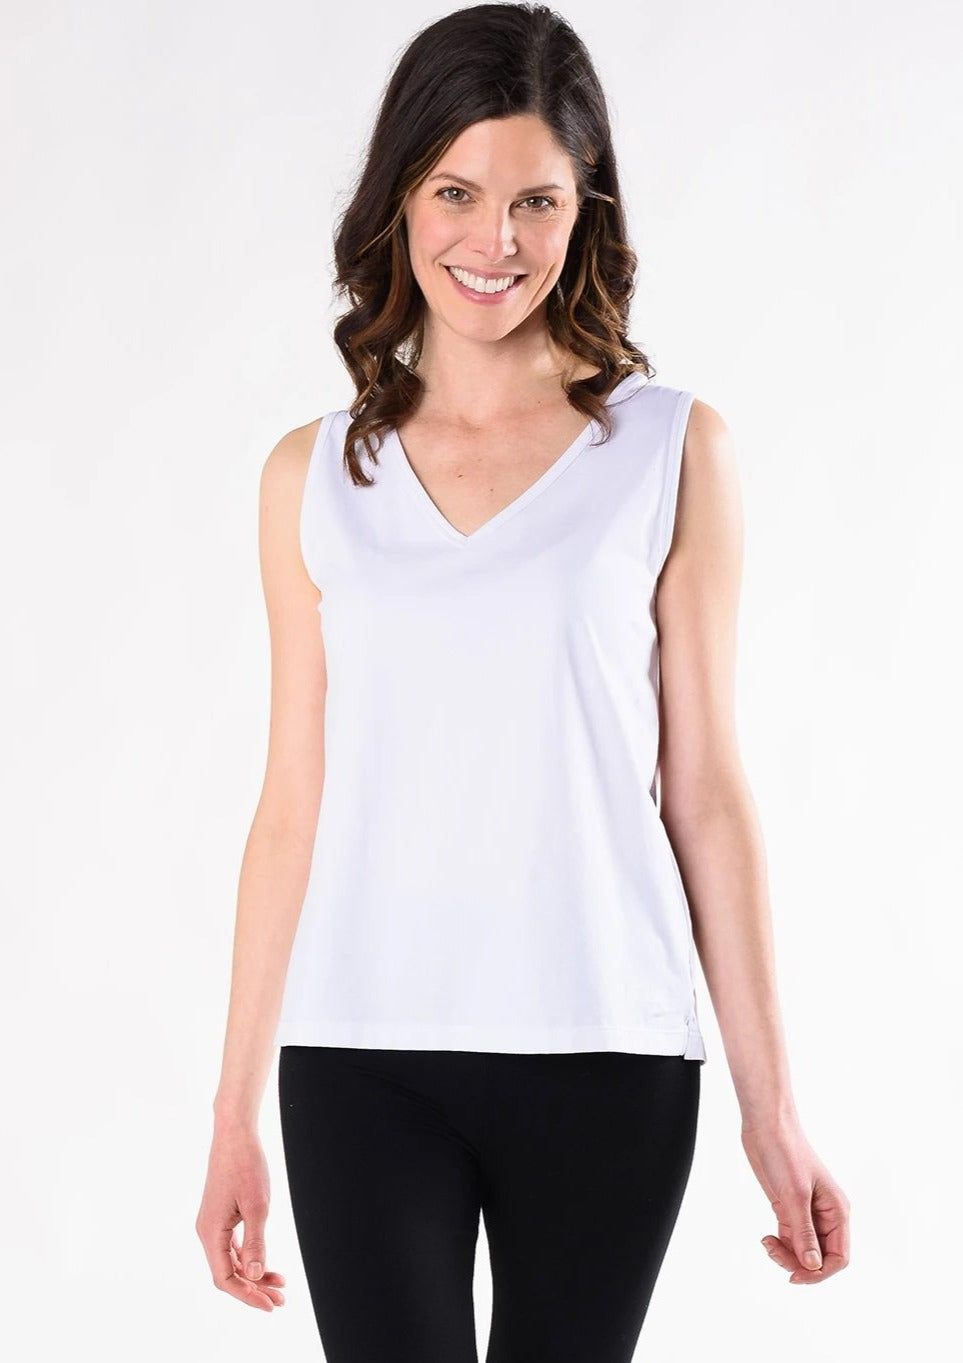 The Mandy Tank Top is a classic go-to tank top; updated with chic side slits and a flattering V-neck. Made with certified organic cotton so you know it’s good for the planet and for your skin. Wear it alone with jeans, or dress it up with a cardigan or jacket. Fabrication:  93% Organic Cotton, 7% Spandex TERRERA $50.00 Ivory White